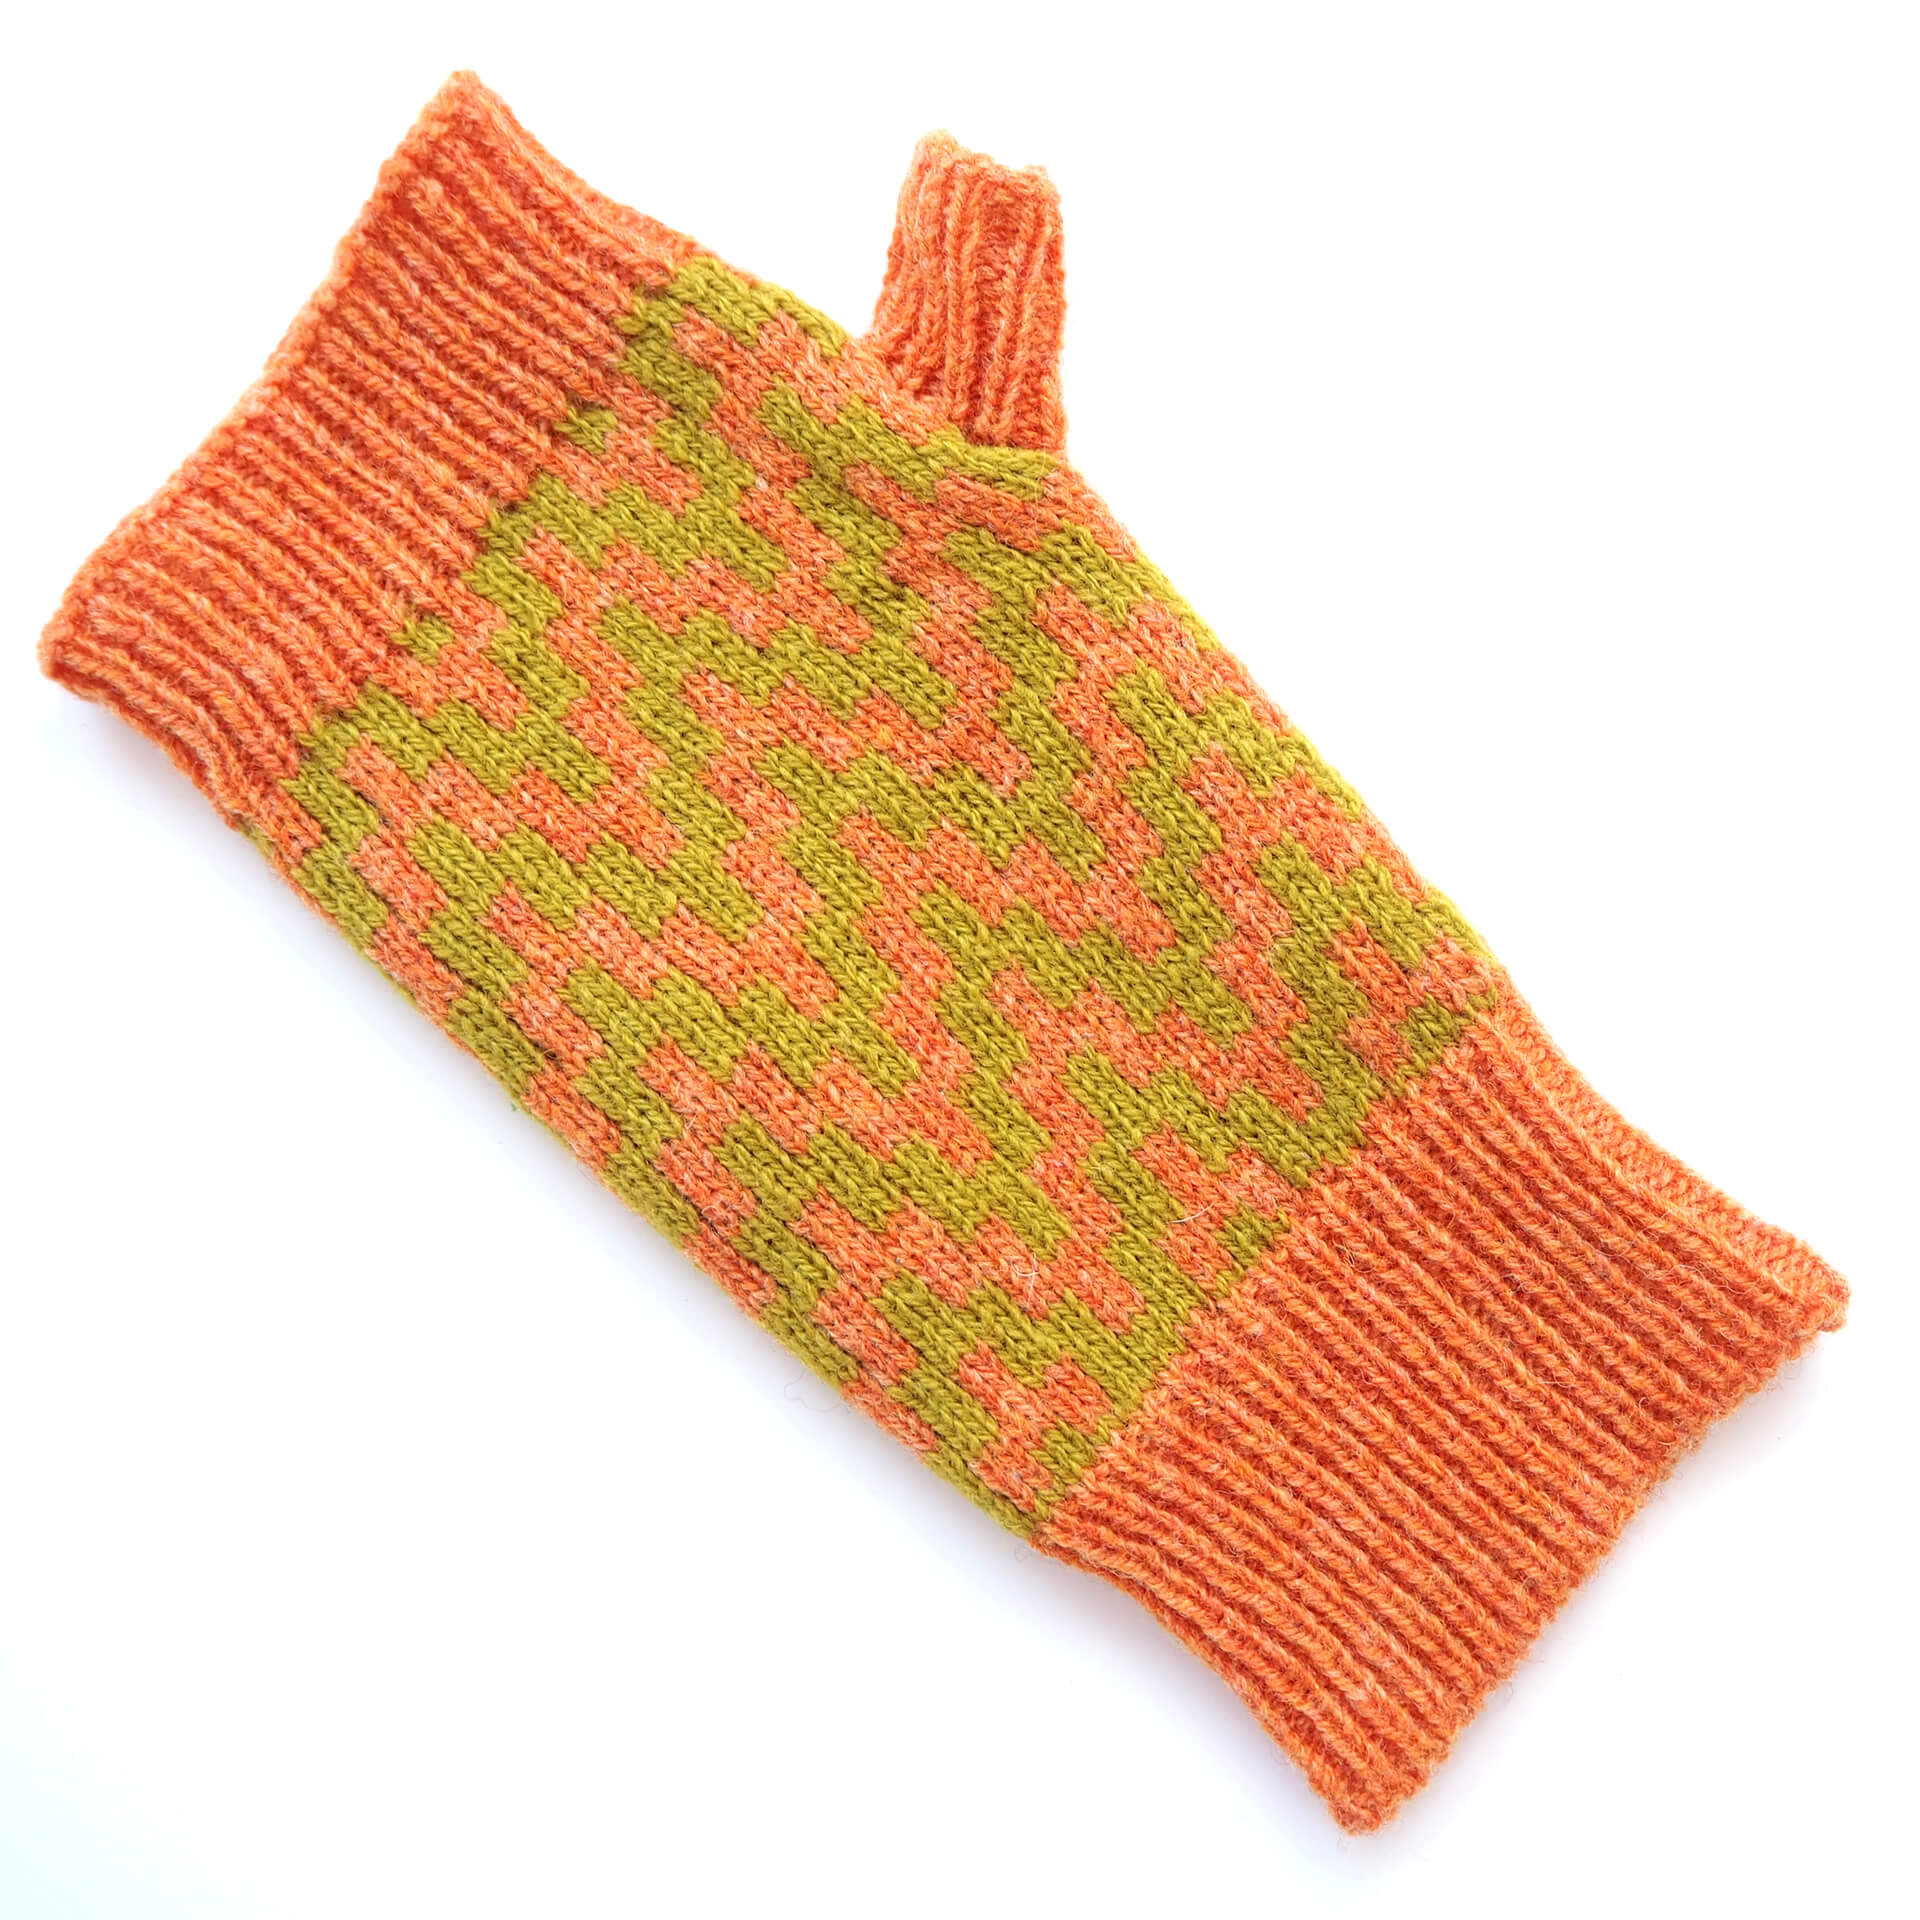 A fingerless glove by K.Moods, it is orange with a thick lime green zig-zag pattern, and sits on a white background. 